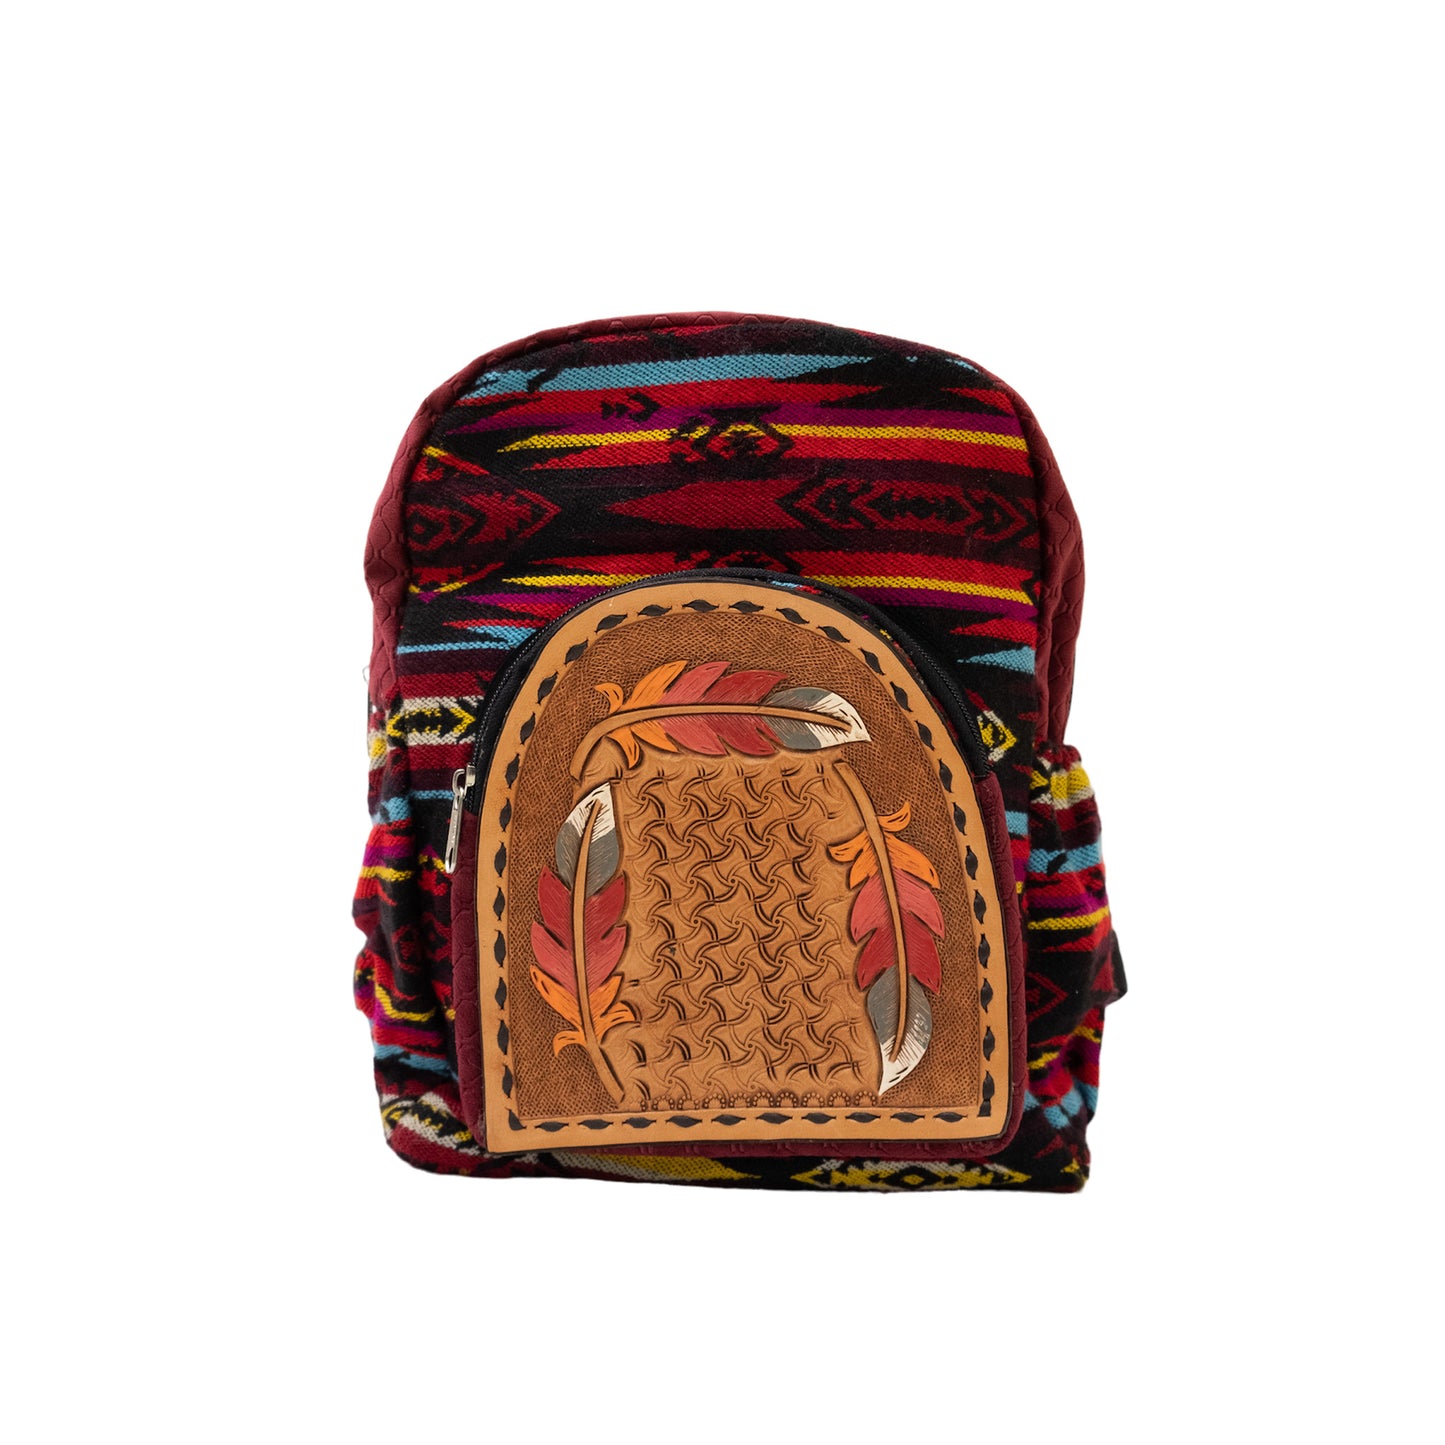 Mini backpack golden leather patch pinweel and feather tooling with buckstitch